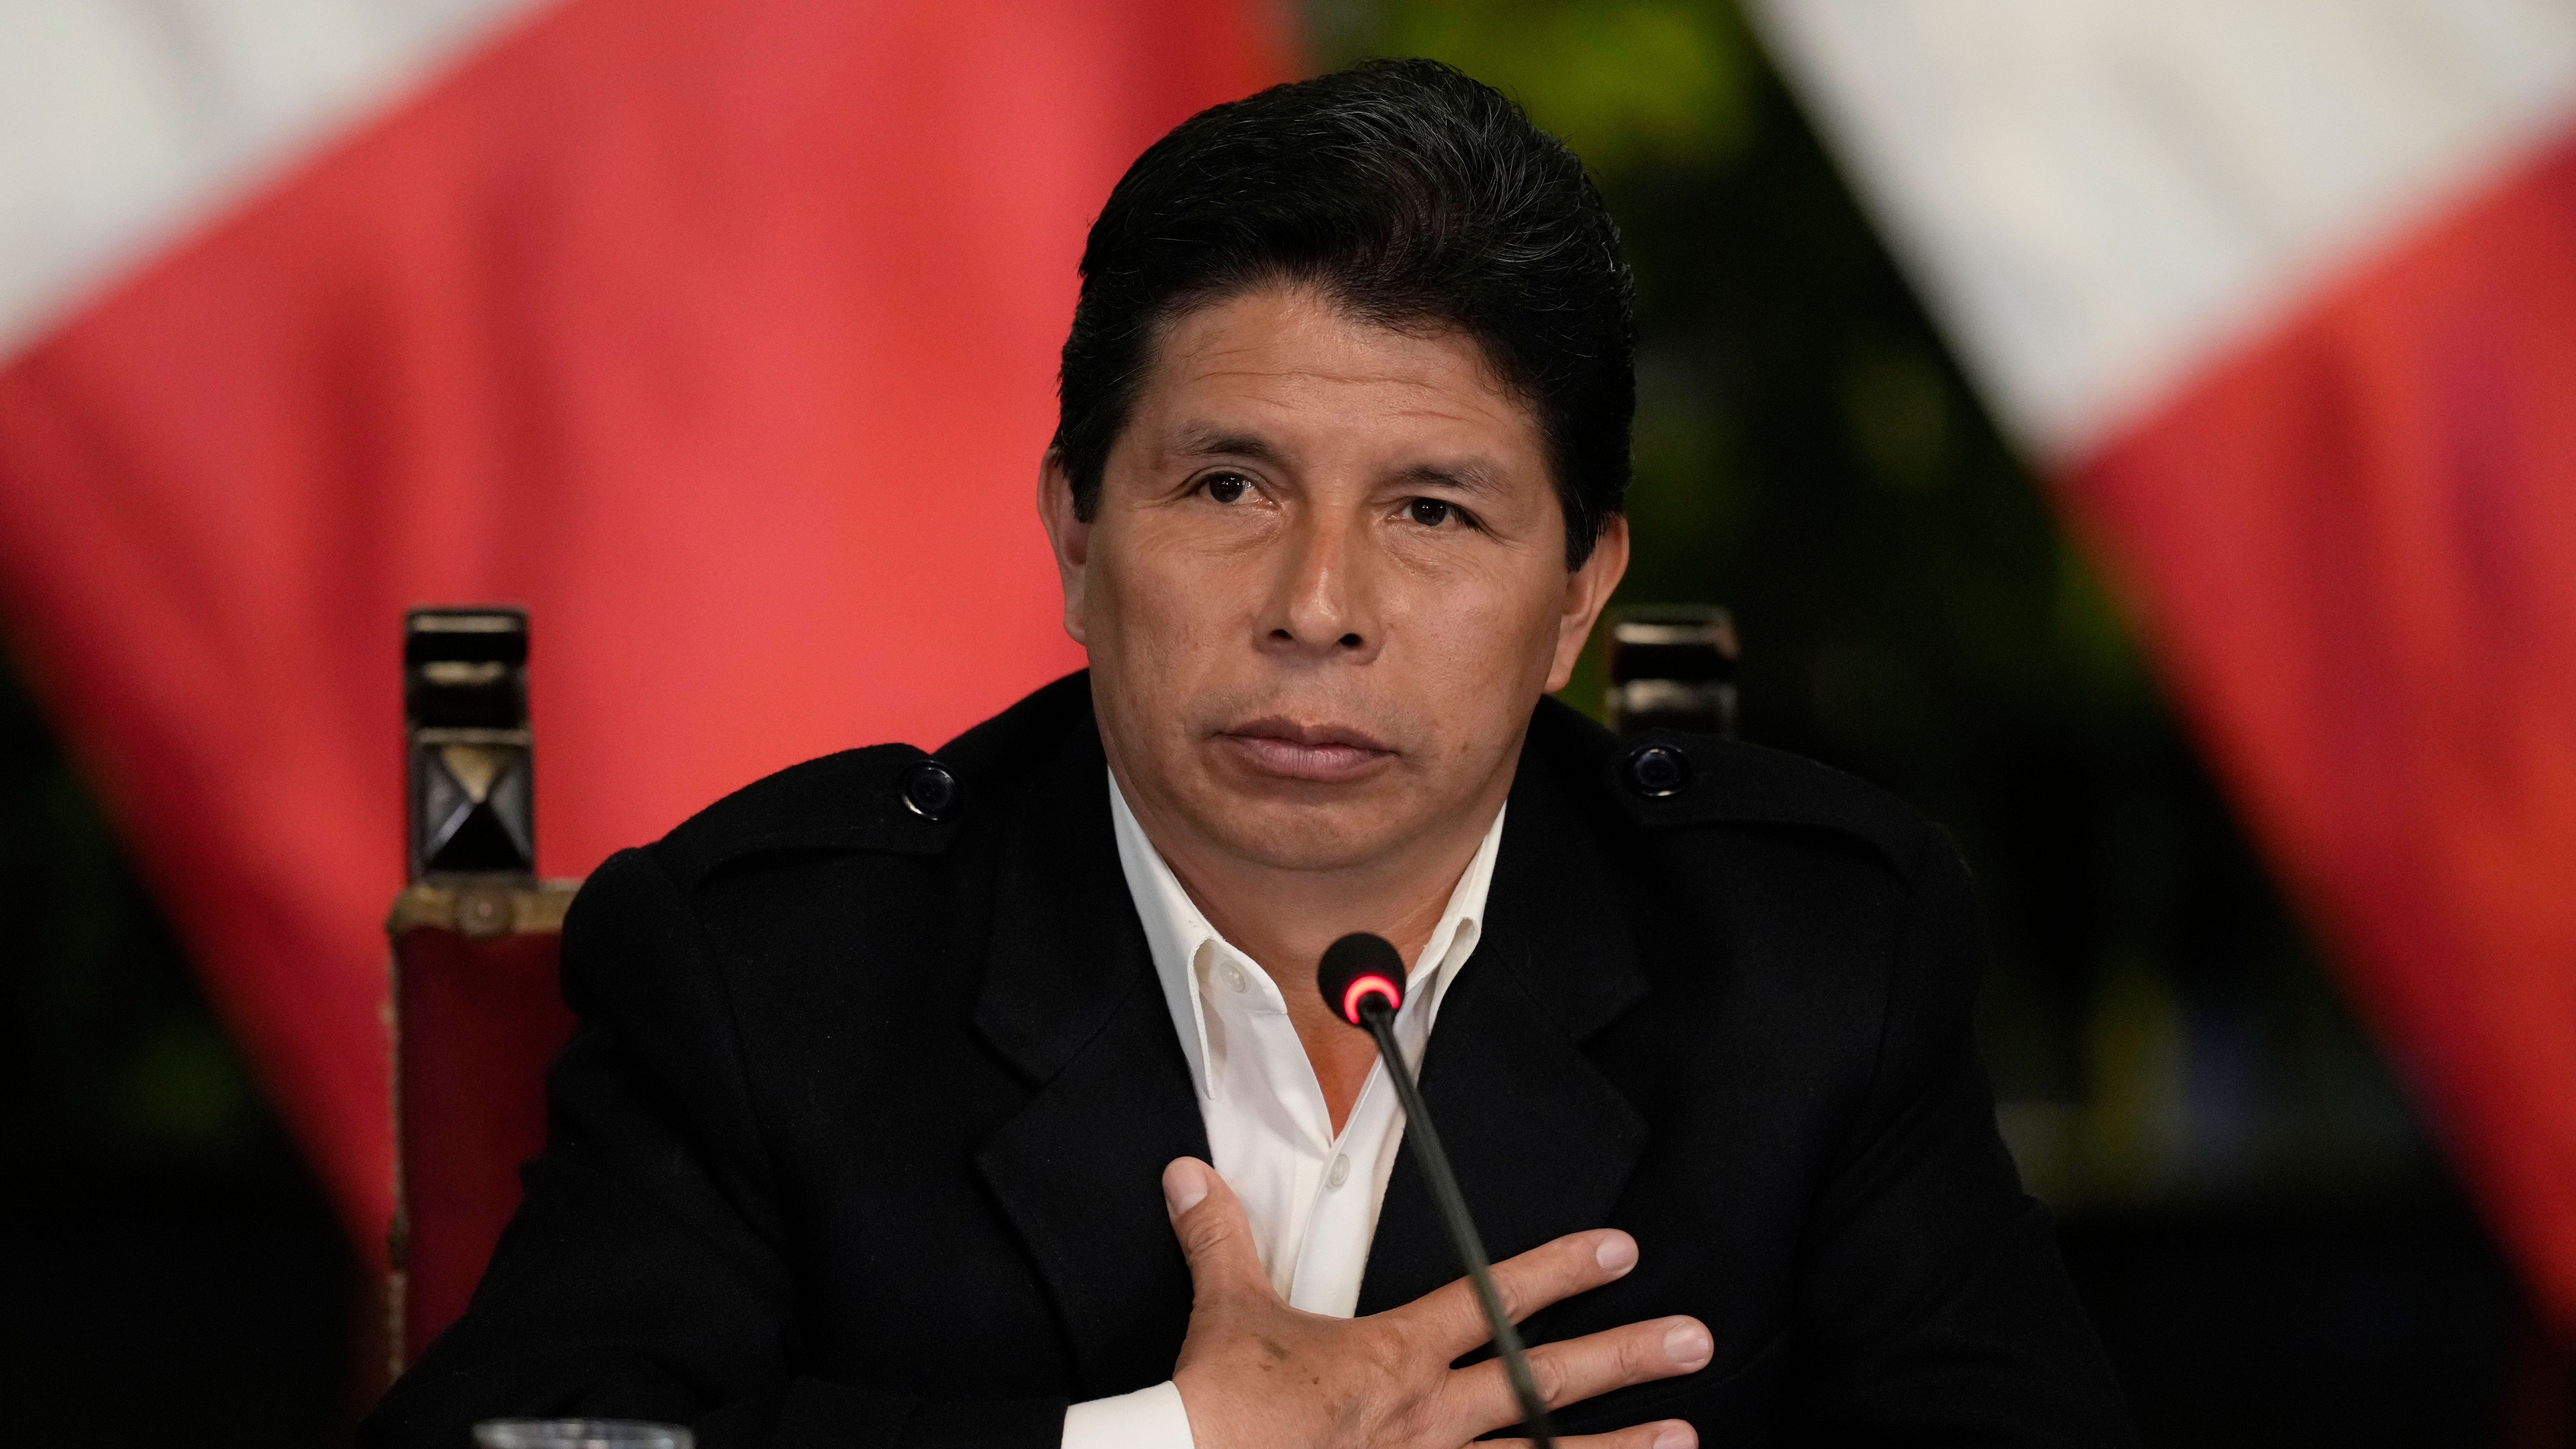 Peru’s president dissolves Congress ahead of 3rd removal try